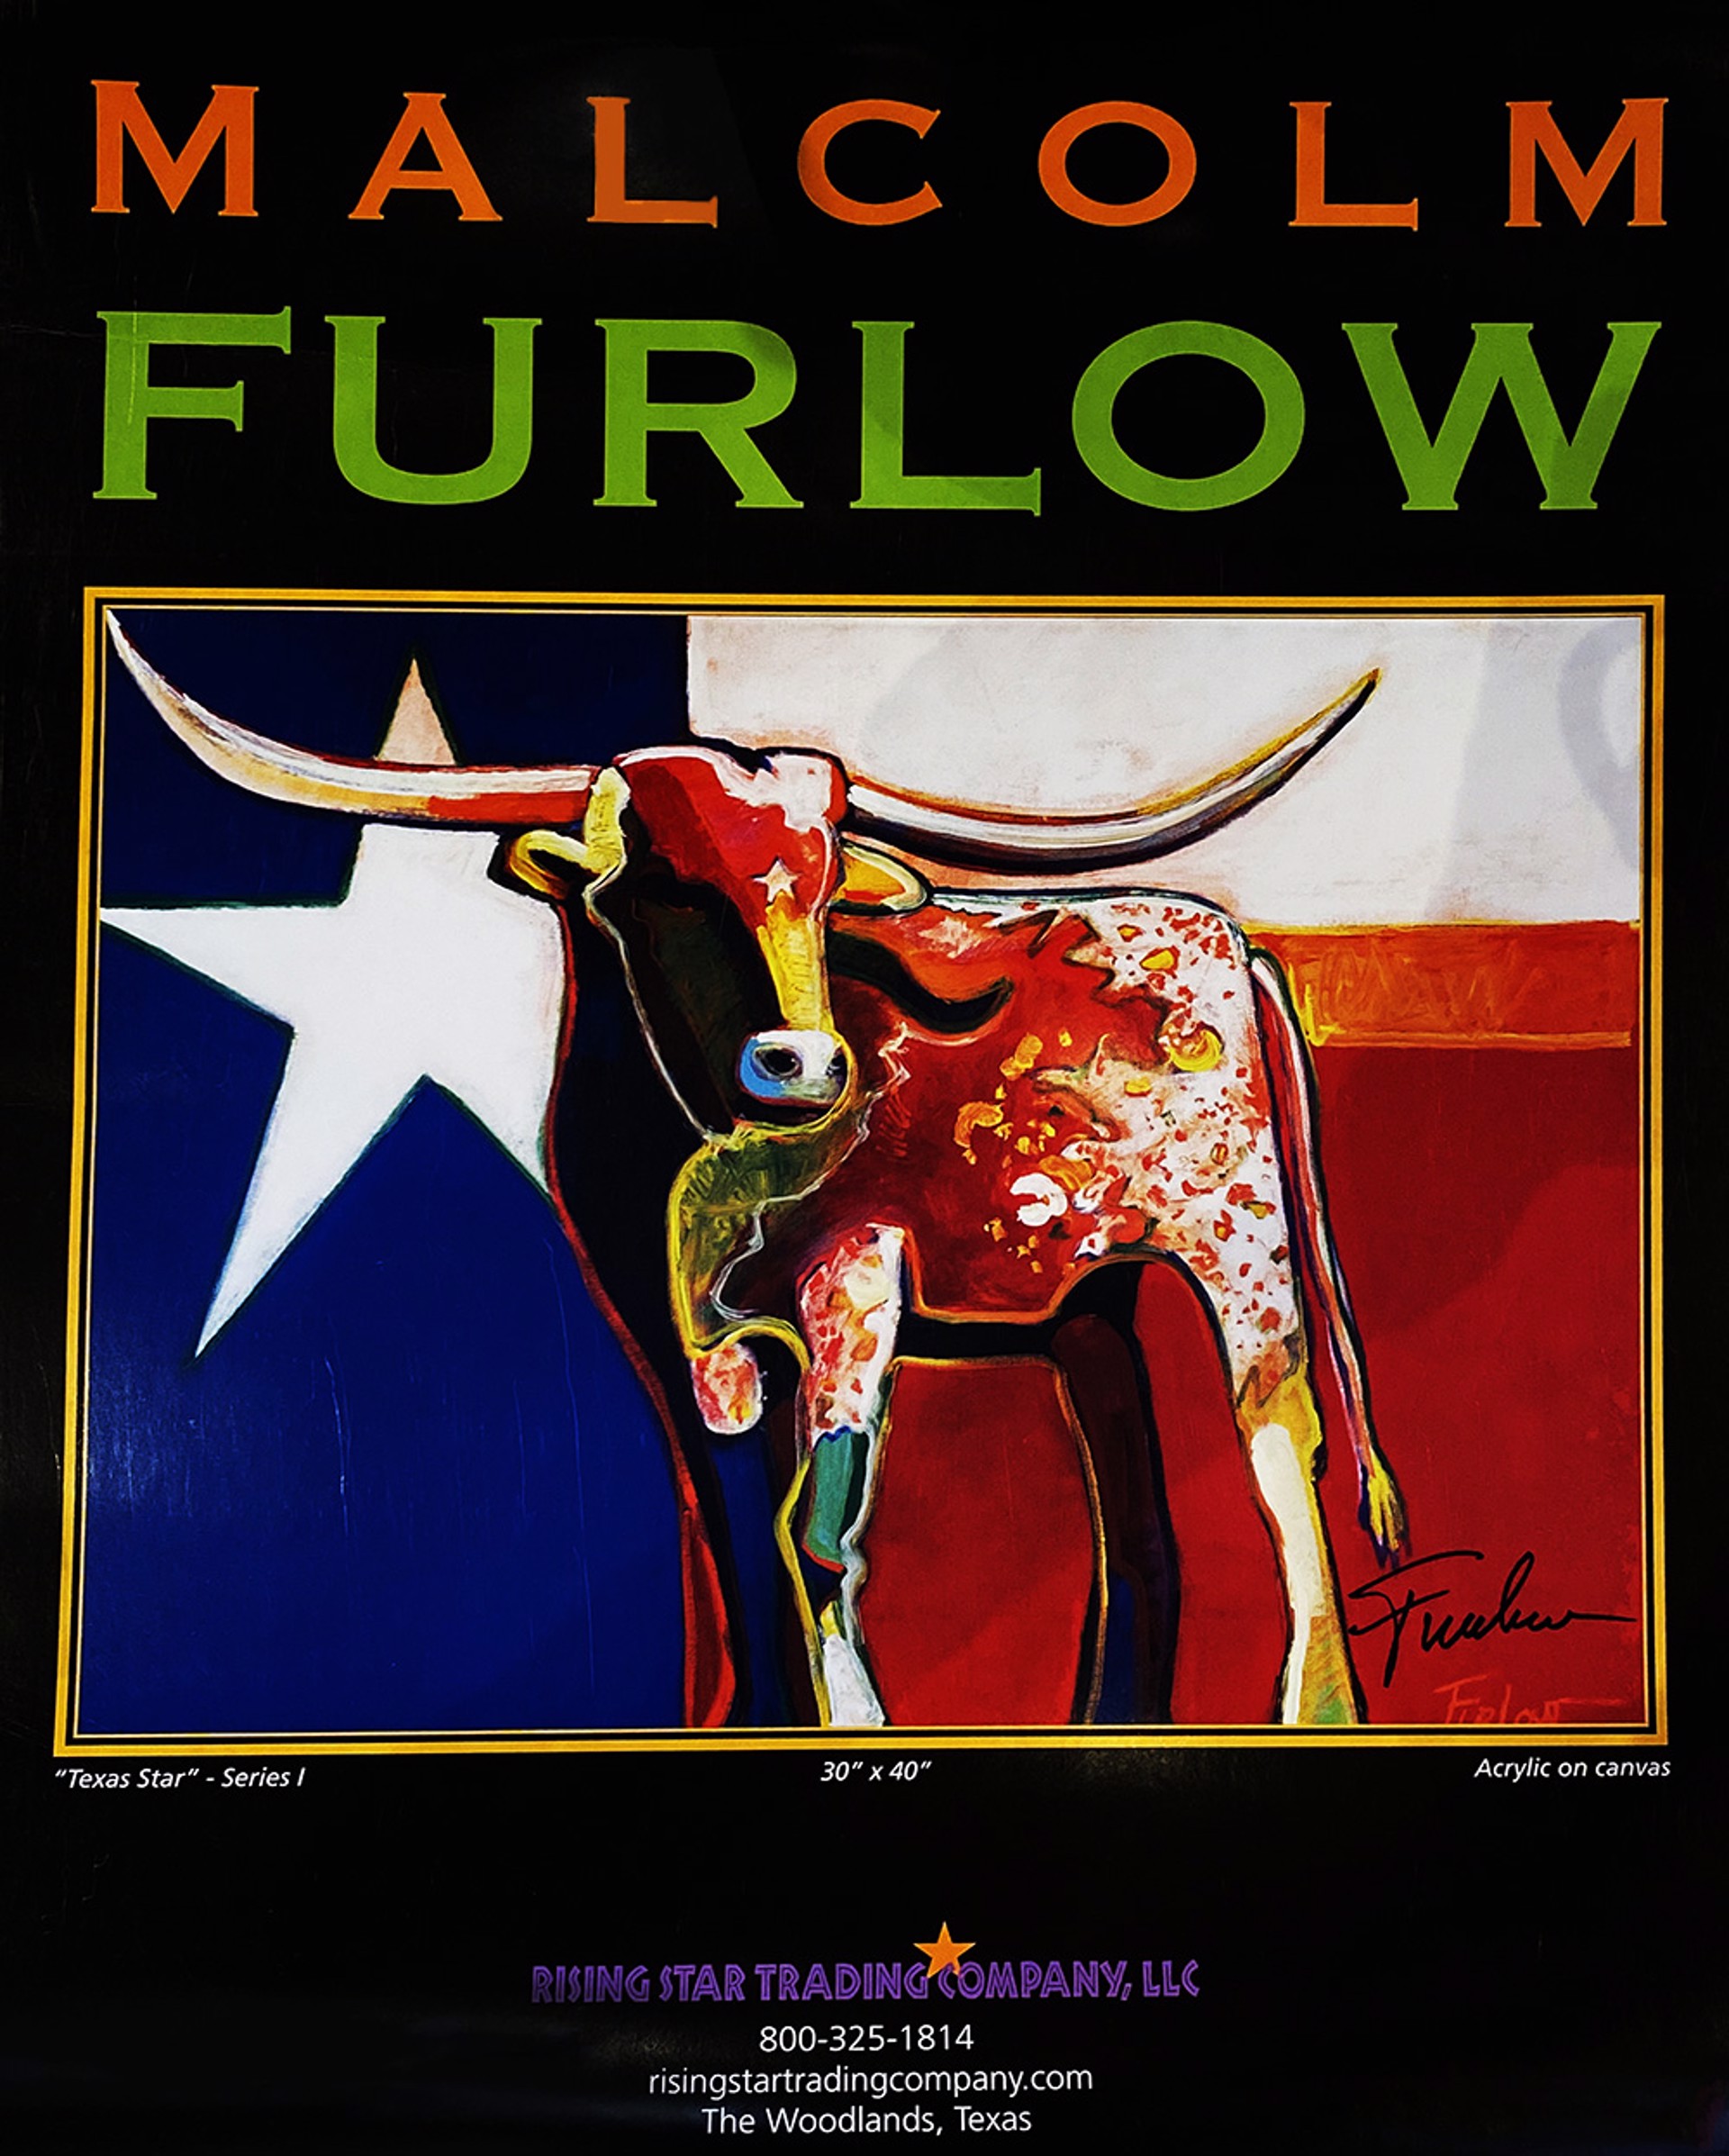 Texas Star Poster by Malcolm Furlow